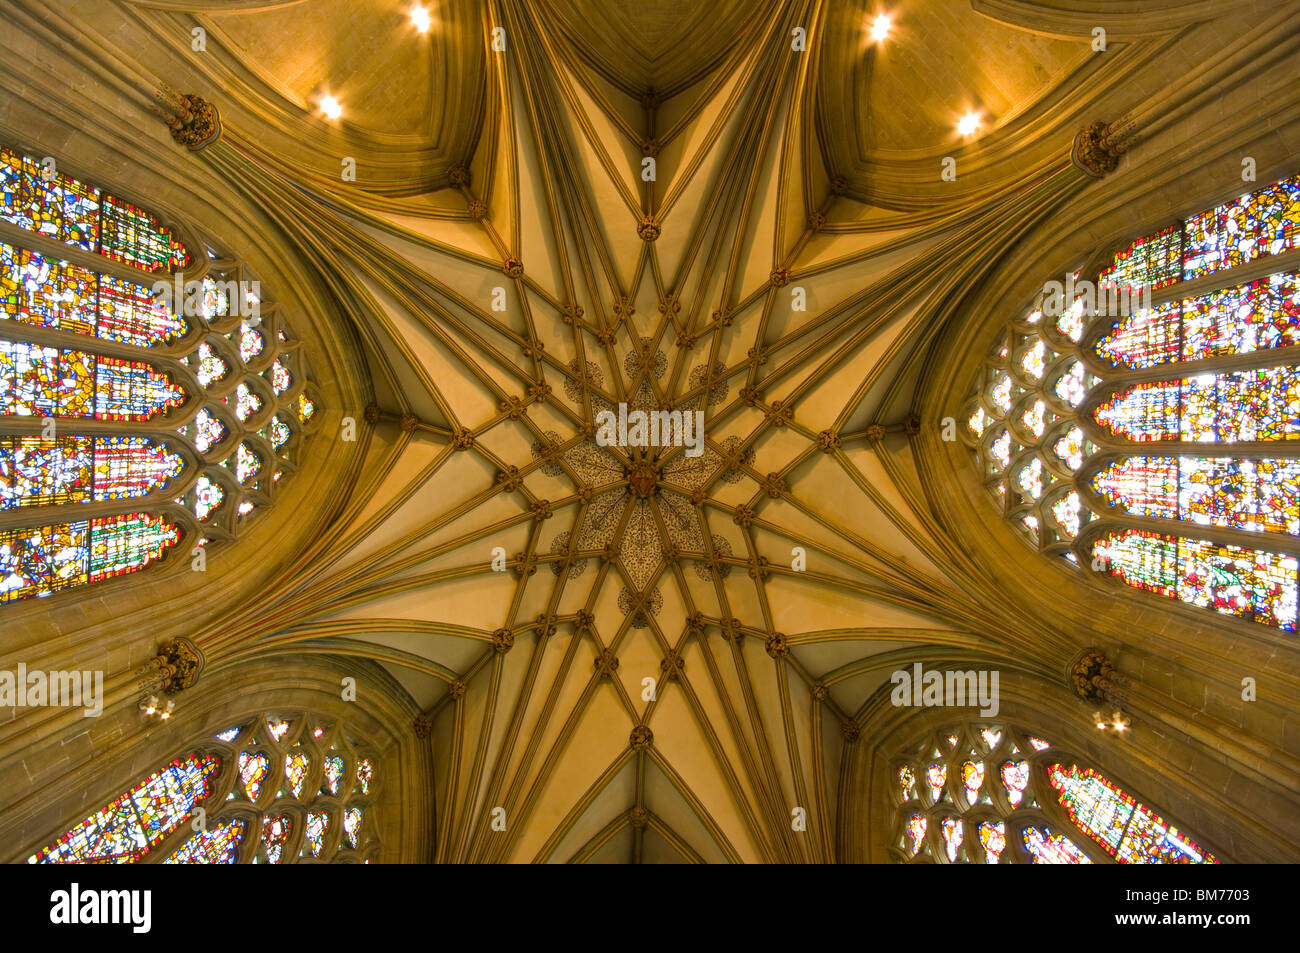 Ornate Roof Of The Lady Chapel Wells Cathedral Somerset England Stock Photo